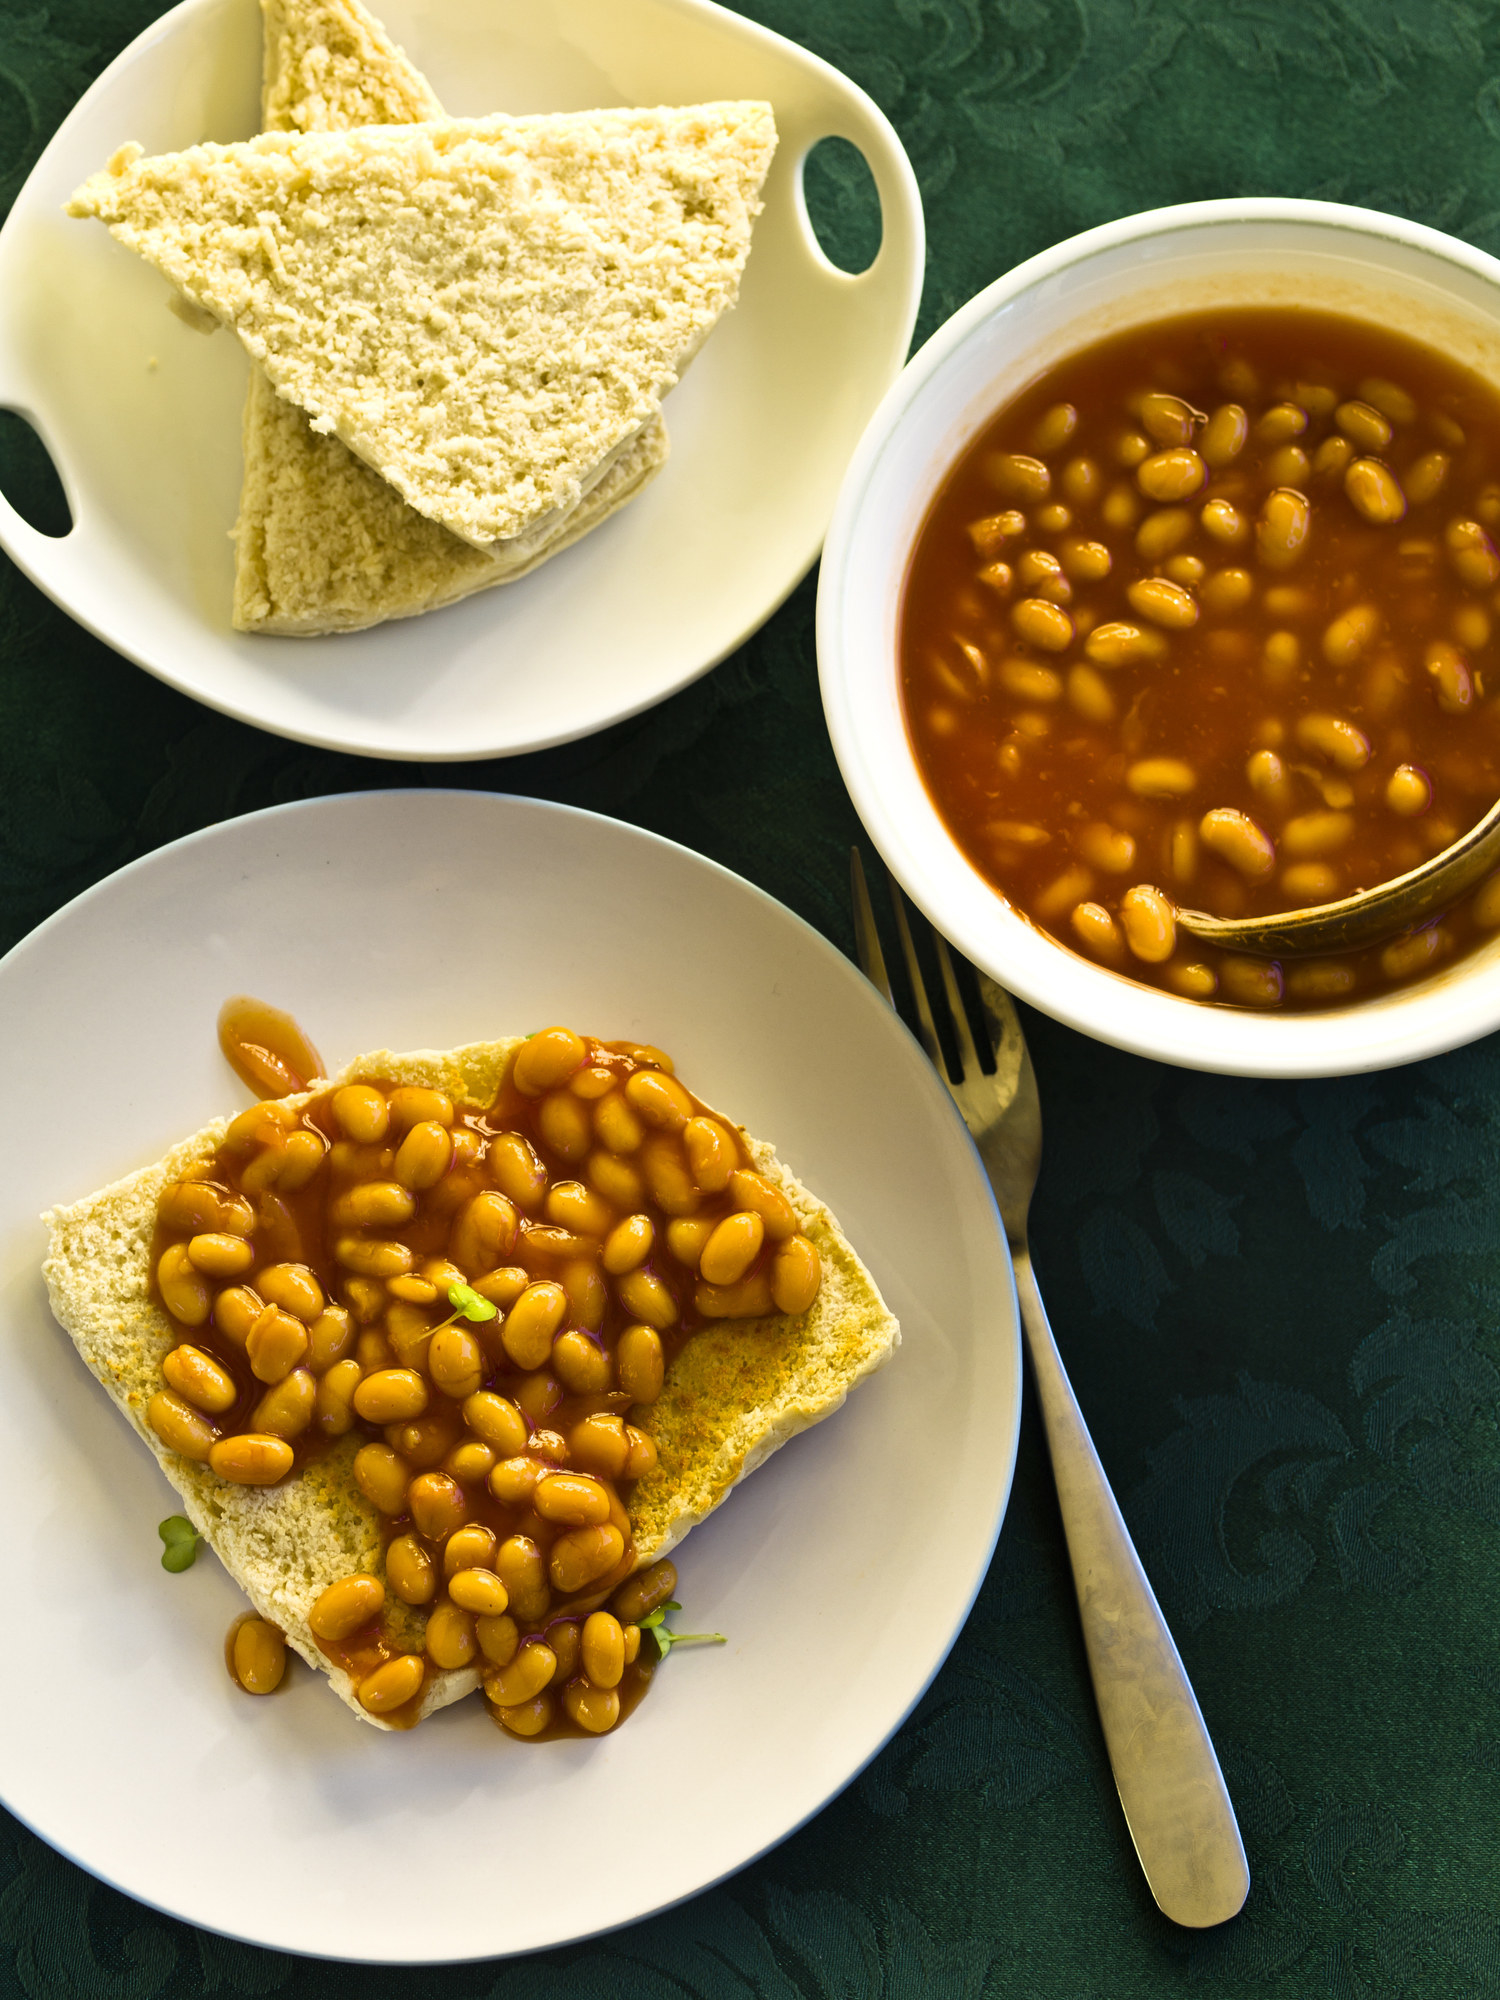 Baked beans on bread.